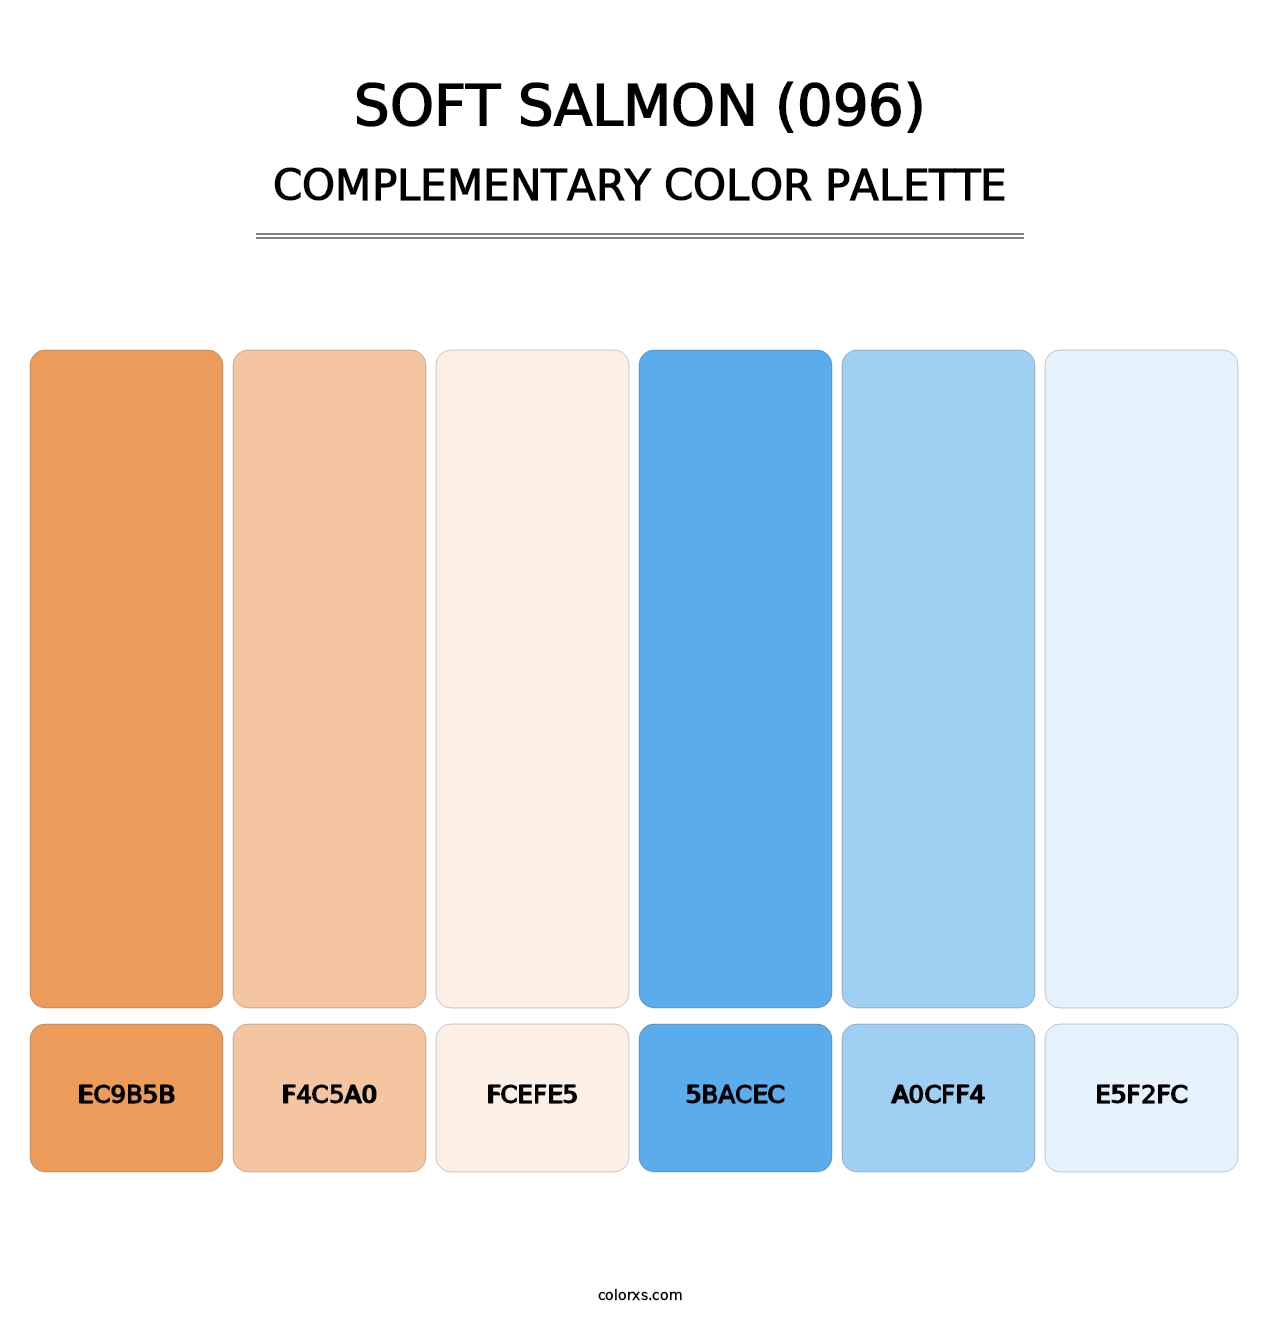 Soft Salmon (096) - Complementary Color Palette